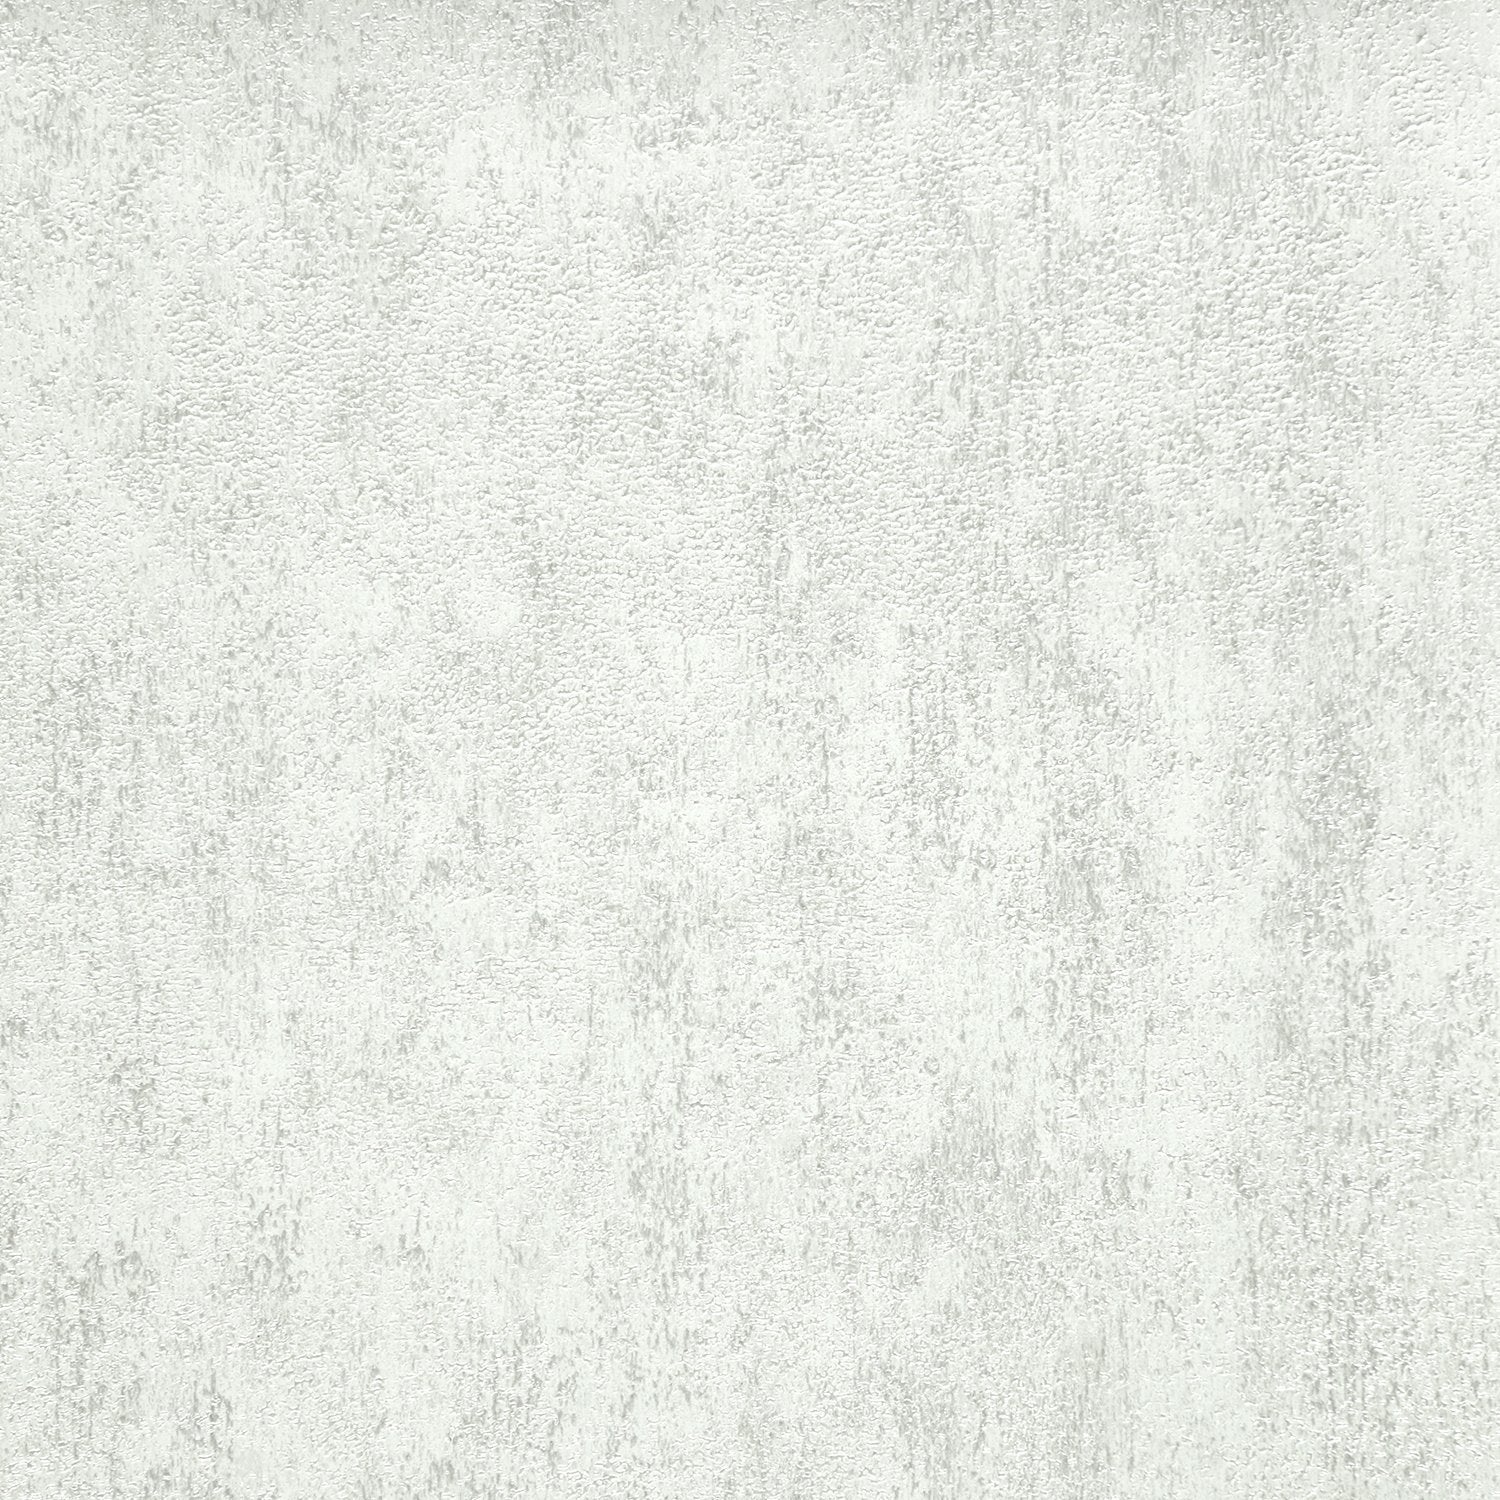 Patina Stone - Y47481 - Wallcovering - Vycon - Kube Contract